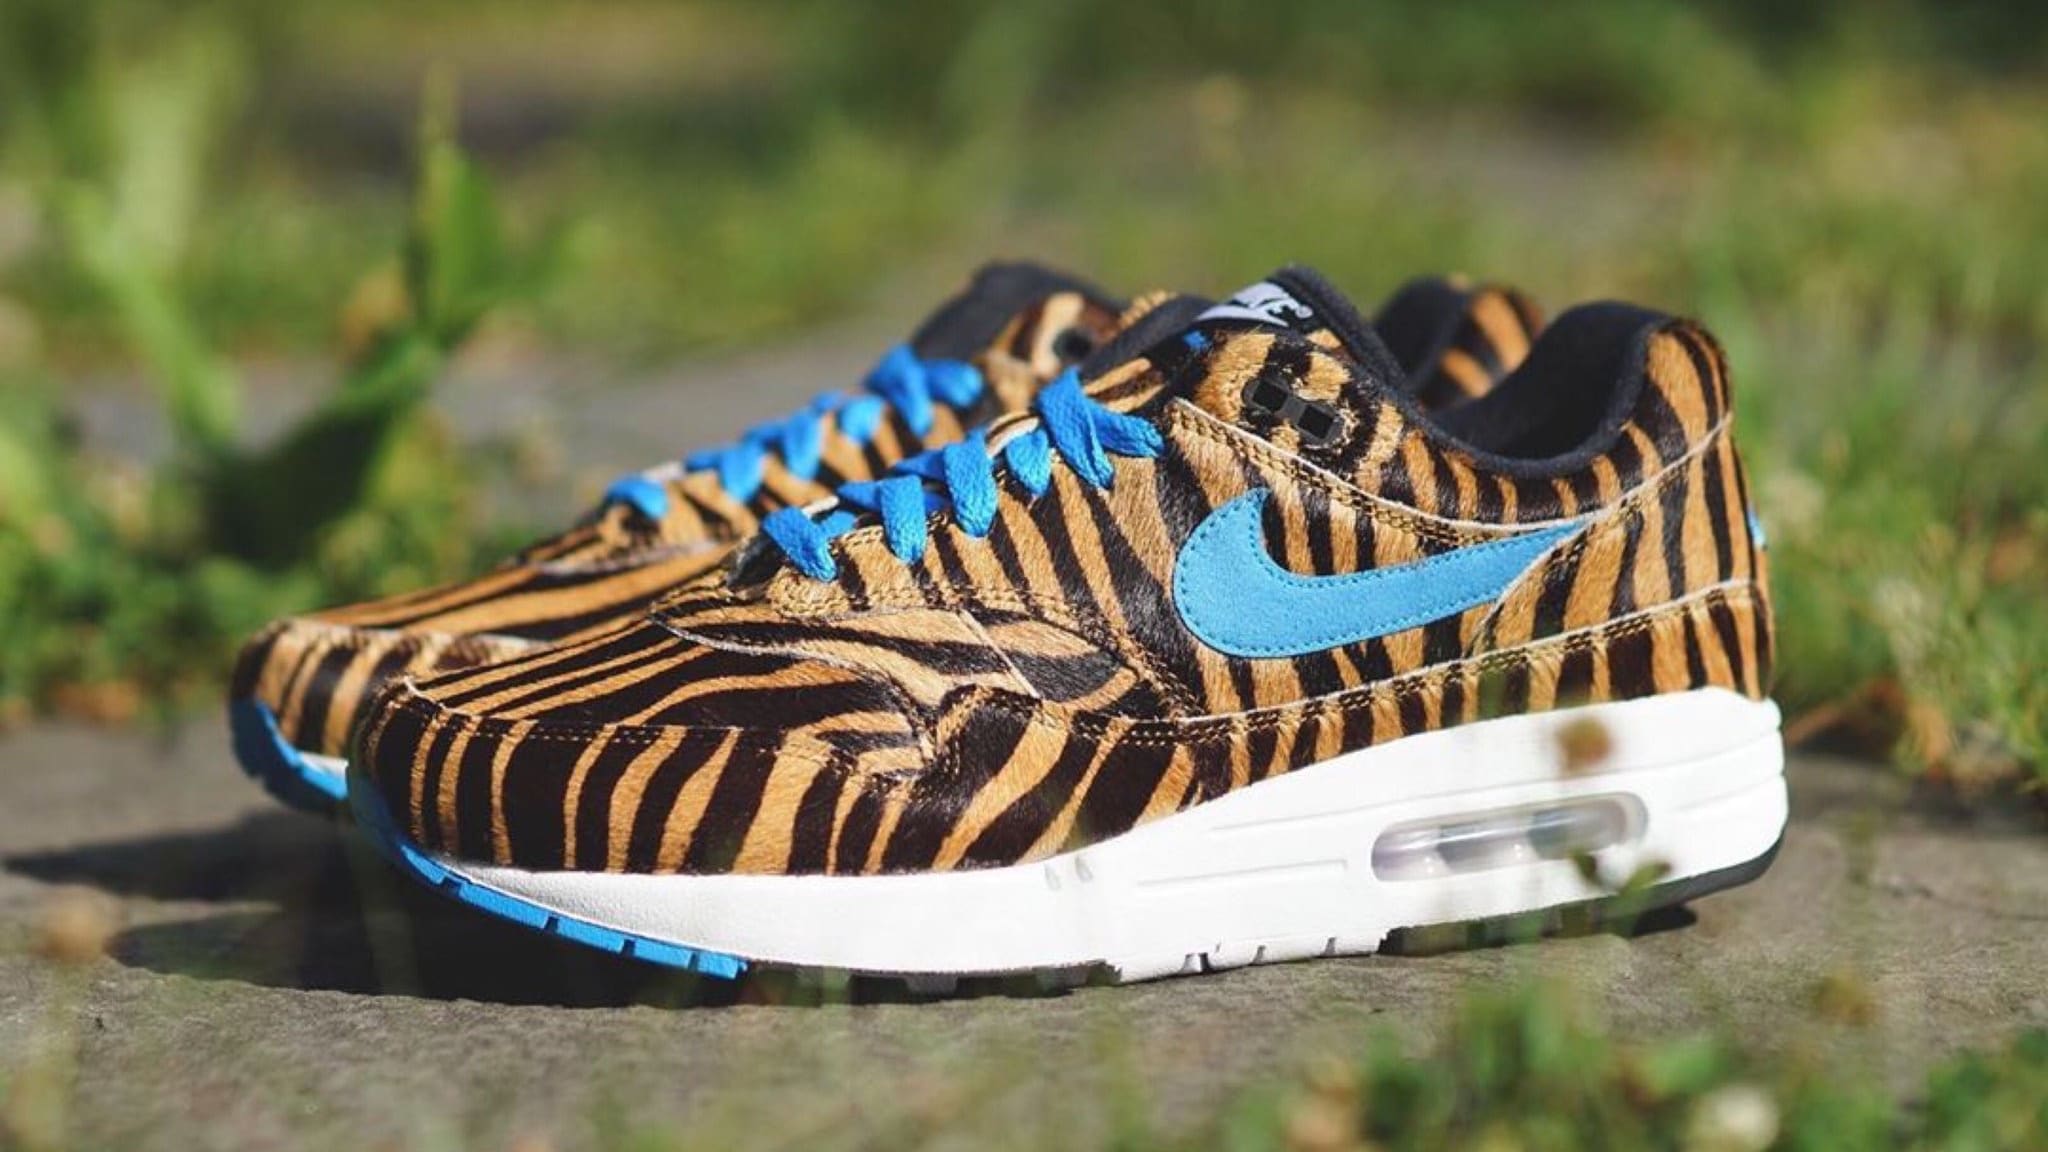 Atmos x Nike Air Max 1 'Animal 3.0' Pack Release Date ComplexCon 